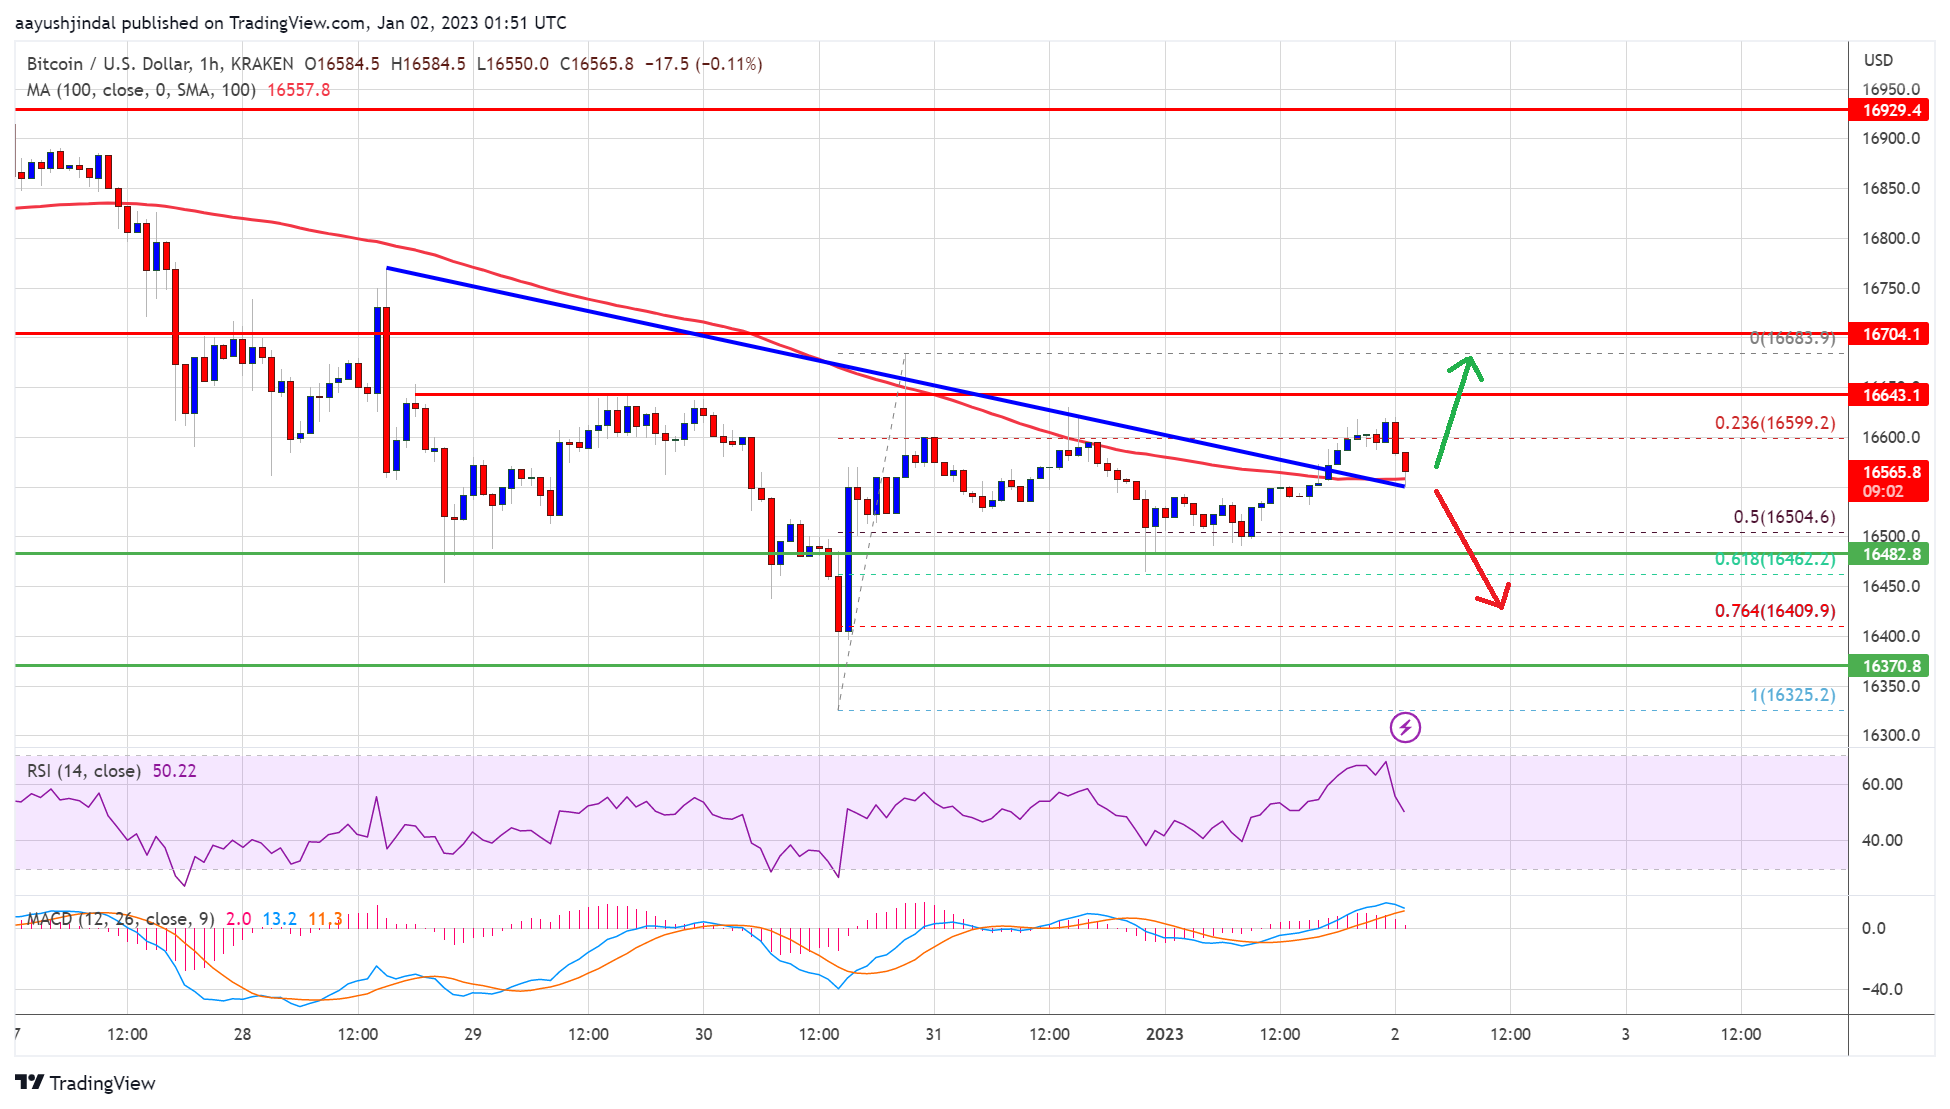 Bitcoin Price Consolidates In Key Range, What Could Trigger Next Move